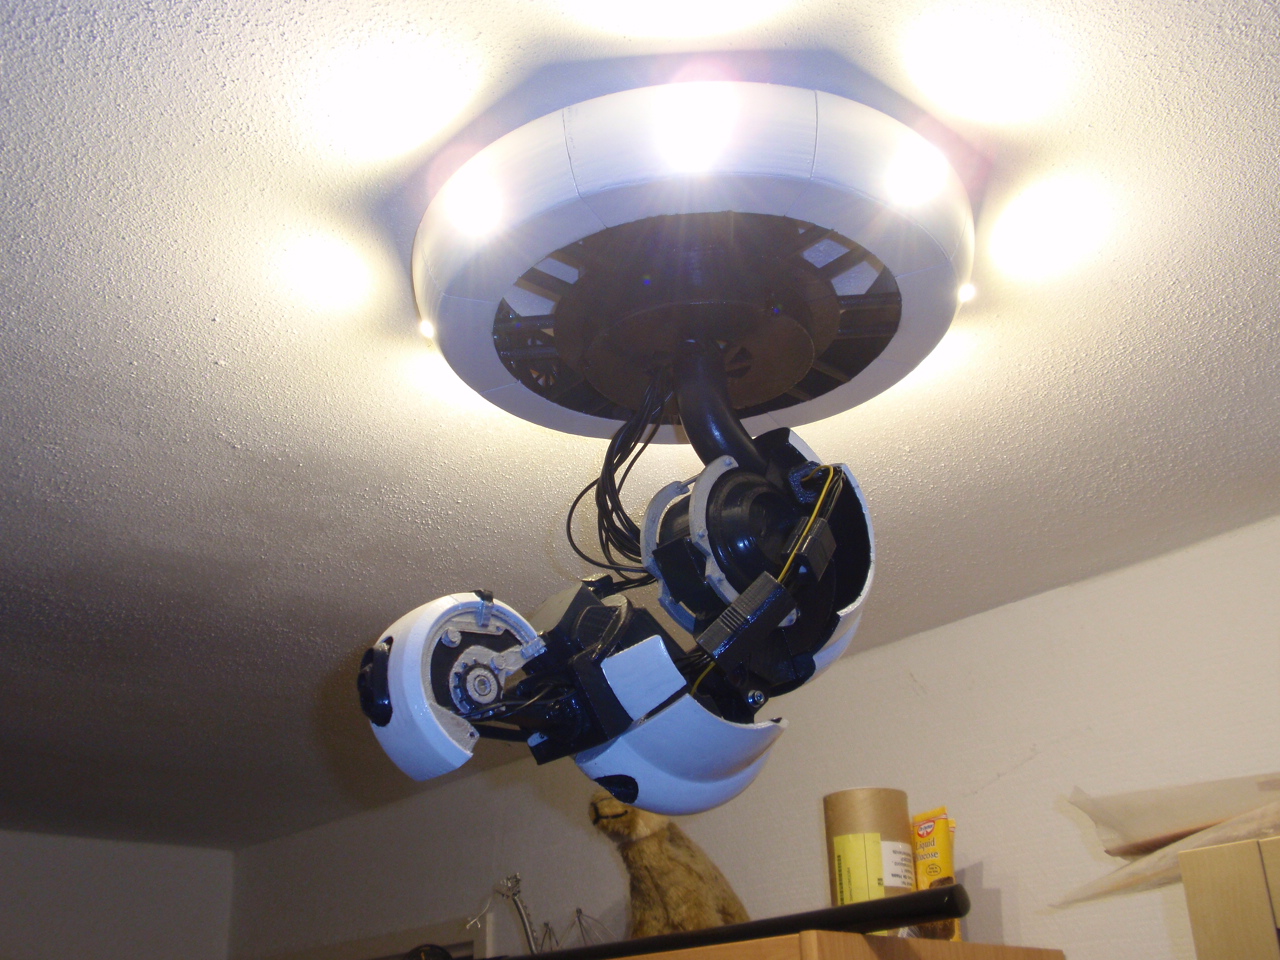 A fully 3D printable GlaDOS Robotic ceiling arm lamp